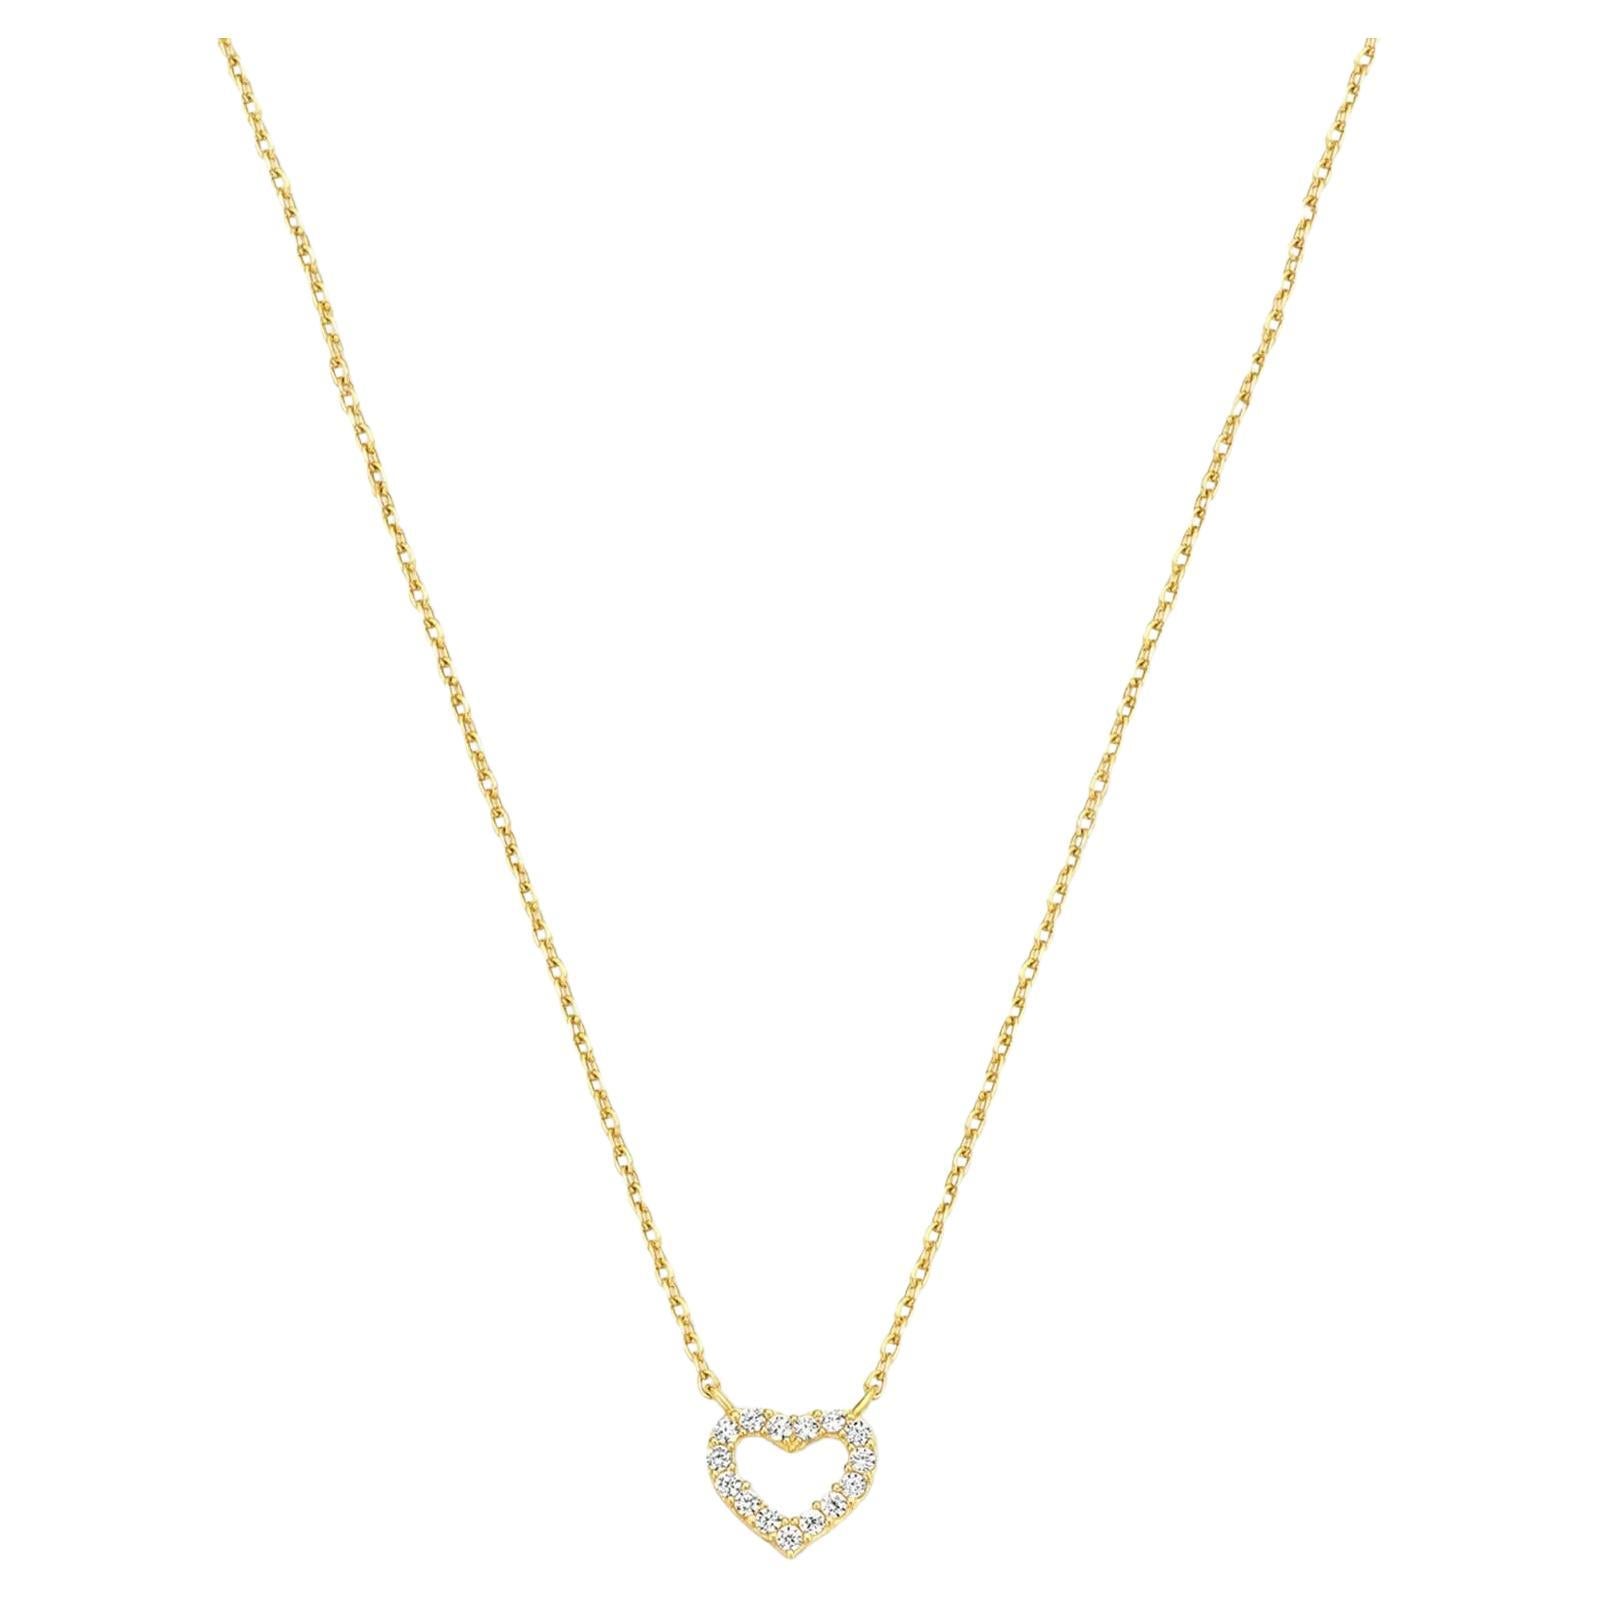 14k Solid Gold Heart Pendant Necklace, Tiny Heart Charm Gold Chain Necklace.